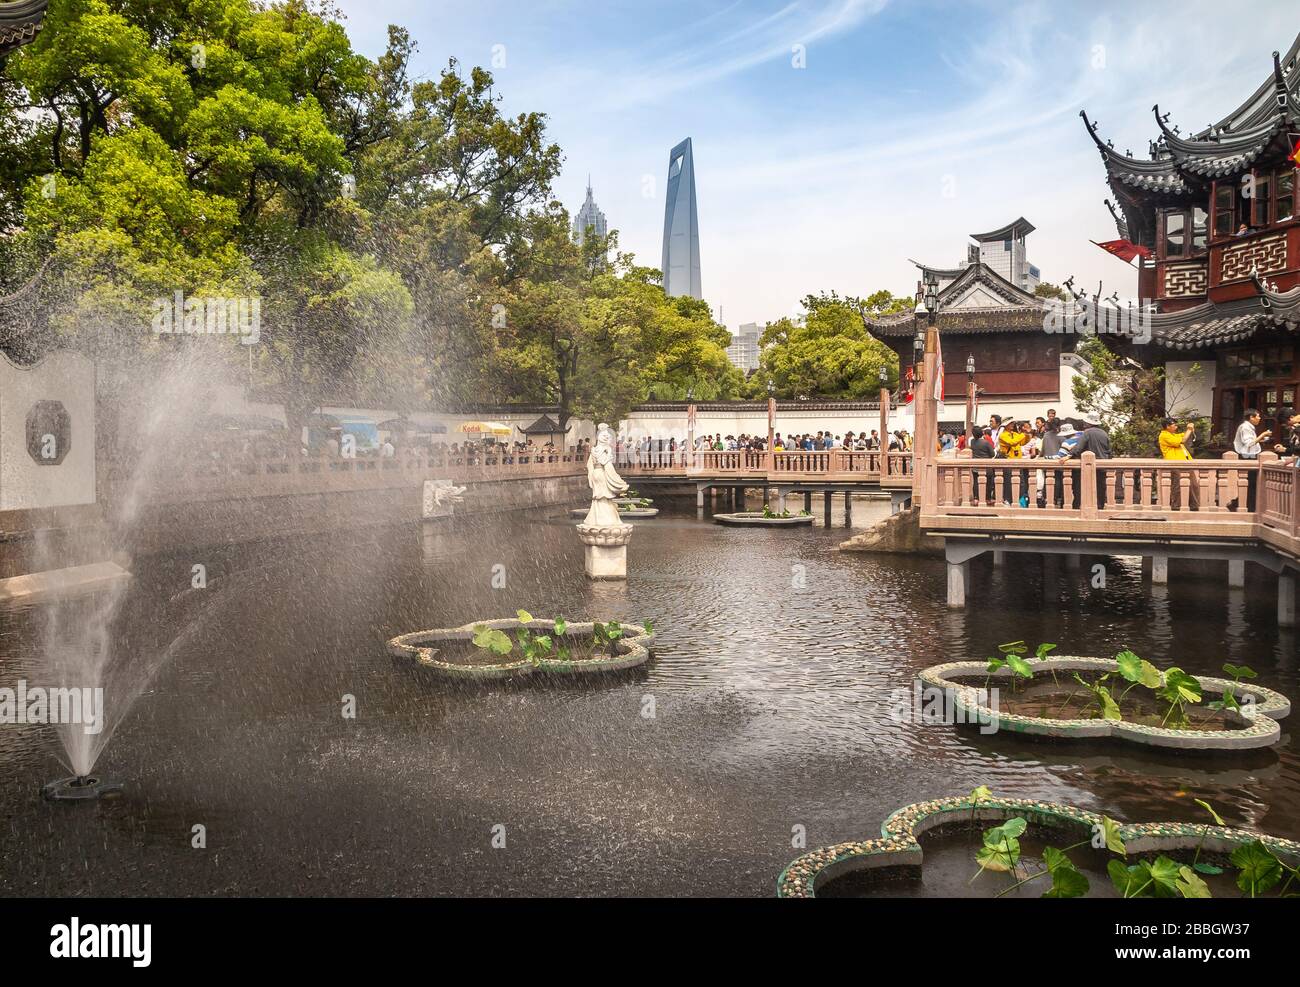 Shanghai, China - May 4, 2010: Yu garden off Yuyuan shopping streets. Landscape, statue of goddess Guanyin in pond with green foliage and SWFC and Jin Stock Photo